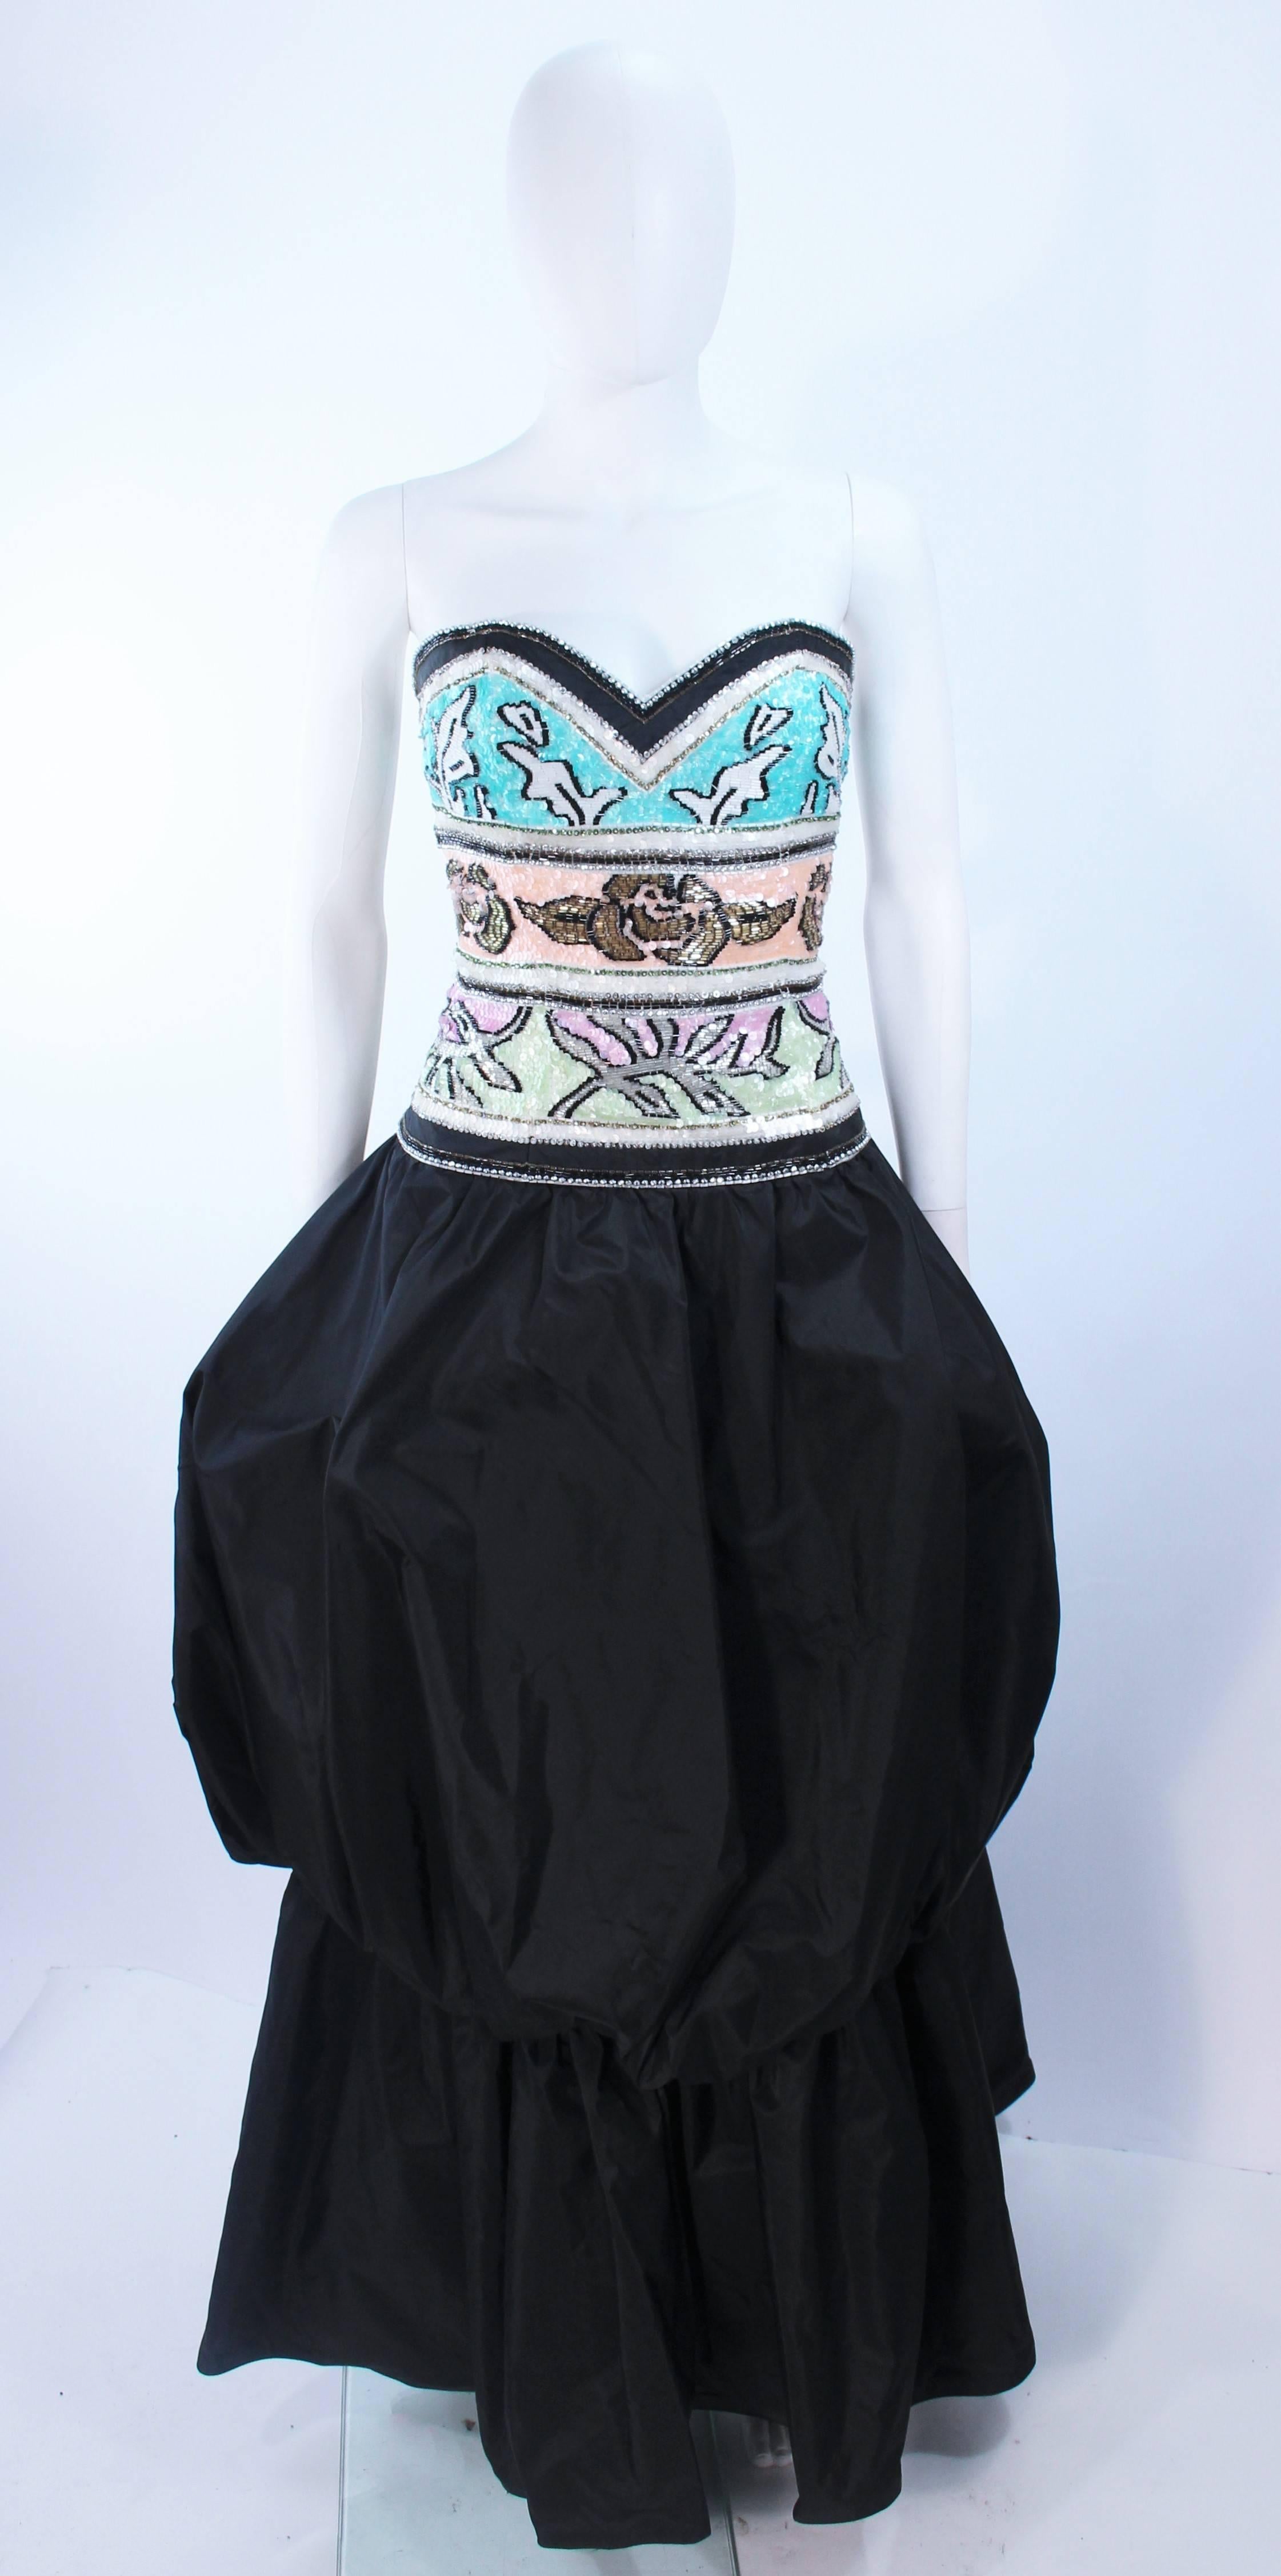 This Brian Winston gown is composed of a tiered black puff skirt with a beaded sequin bodice. Features a center back zipper closure. In excellent vintage condition.

**Please cross-reference measurements for personal accuracy. Size in description